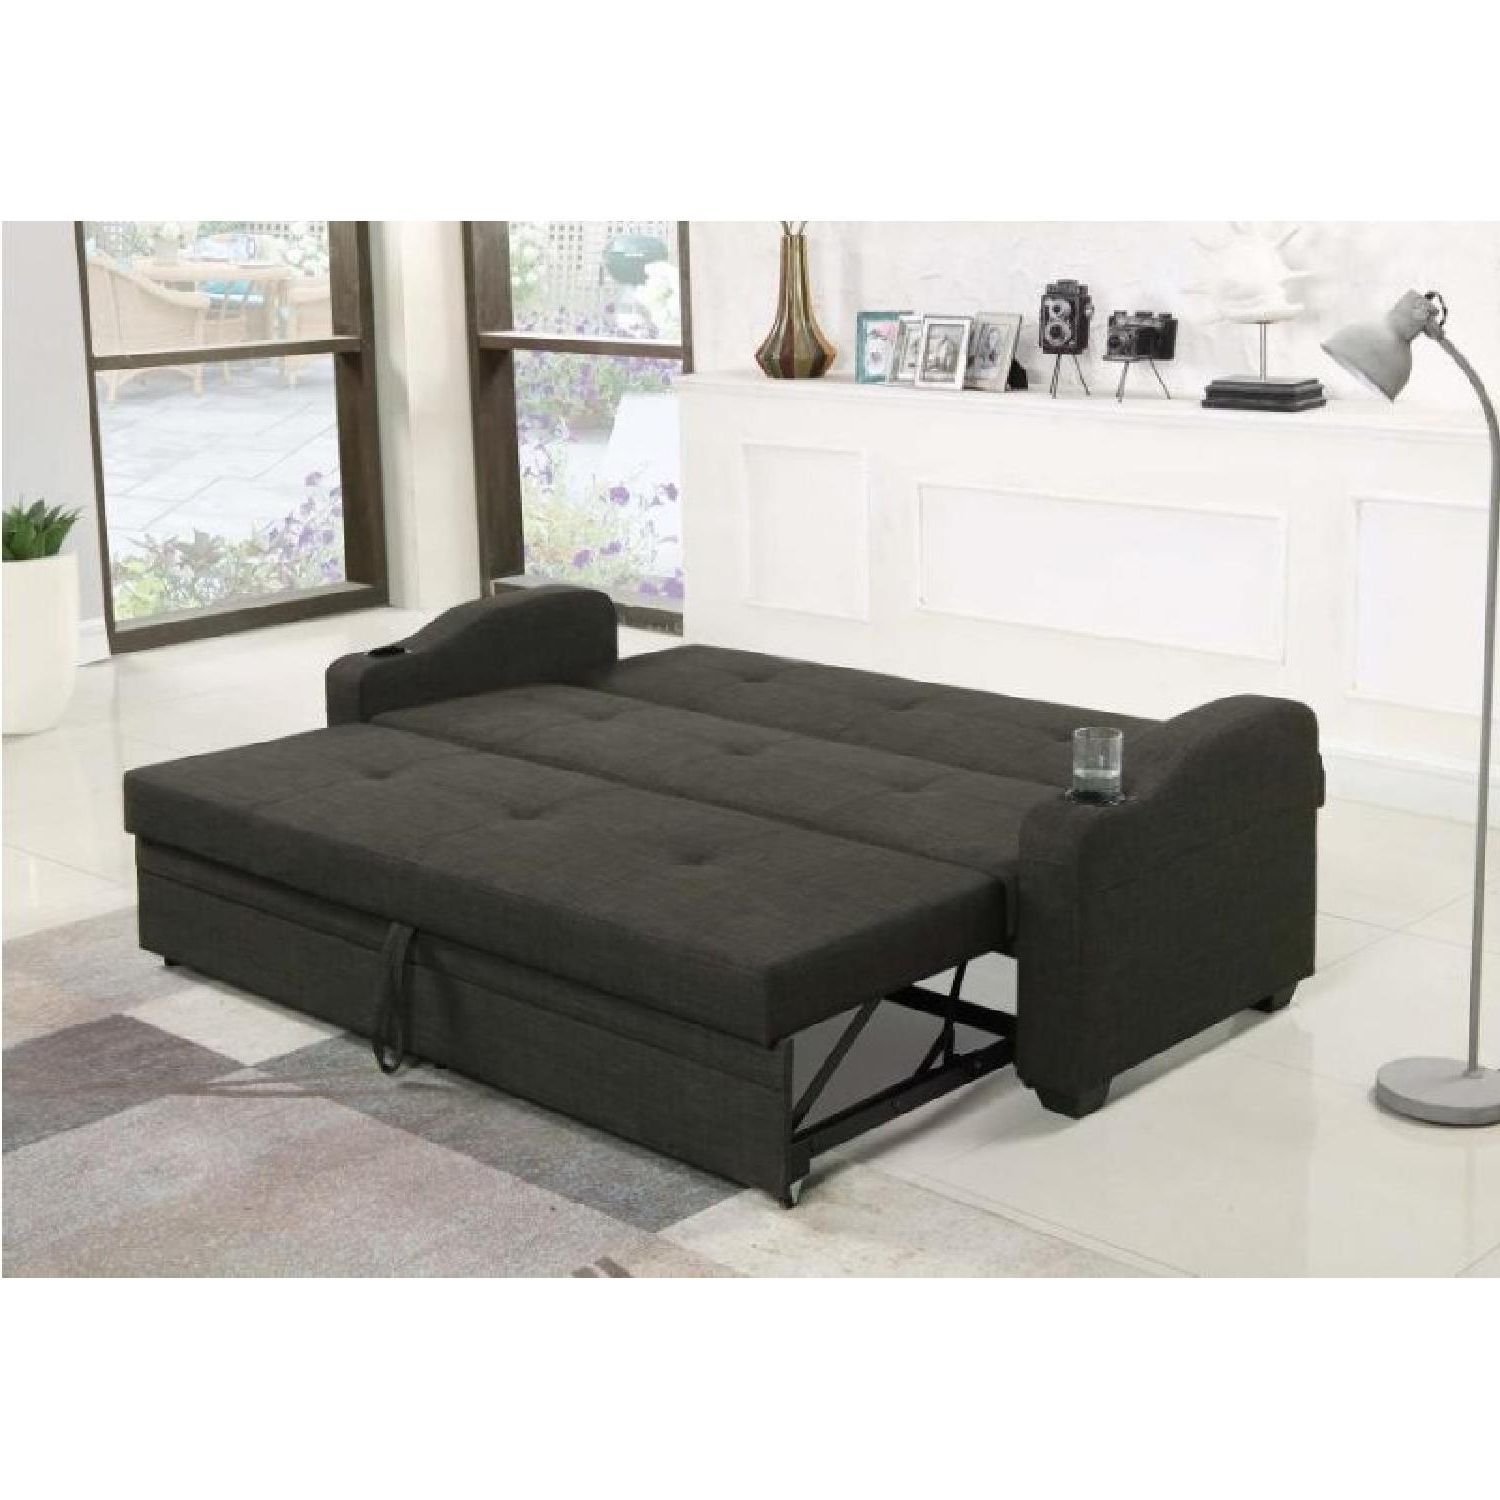 Famous 3 In 1 Gray Pull Out Sleeper Sofas Intended For Charcoal Grey Pull Out Sleeper Sofa – Aptdeco (View 14 of 15)